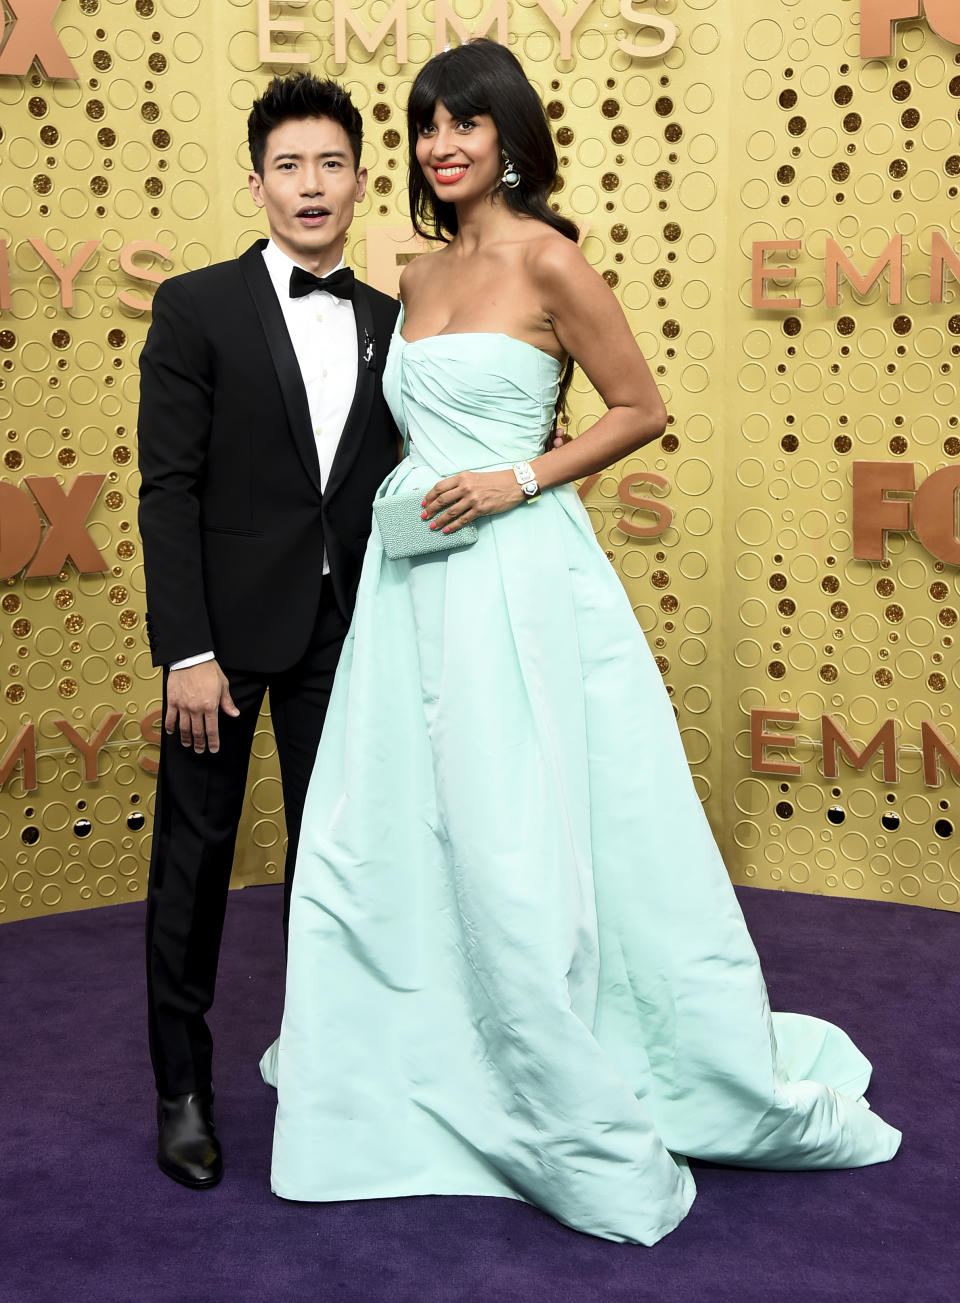 Manny Jacinto, left, and Jameela Jamil arrive at the 71st Primetime Emmy Awards on Sunday, Sept. 22, 2019, at the Microsoft Theater in Los Angeles. (Photo by Jordan Strauss/Invision/AP)